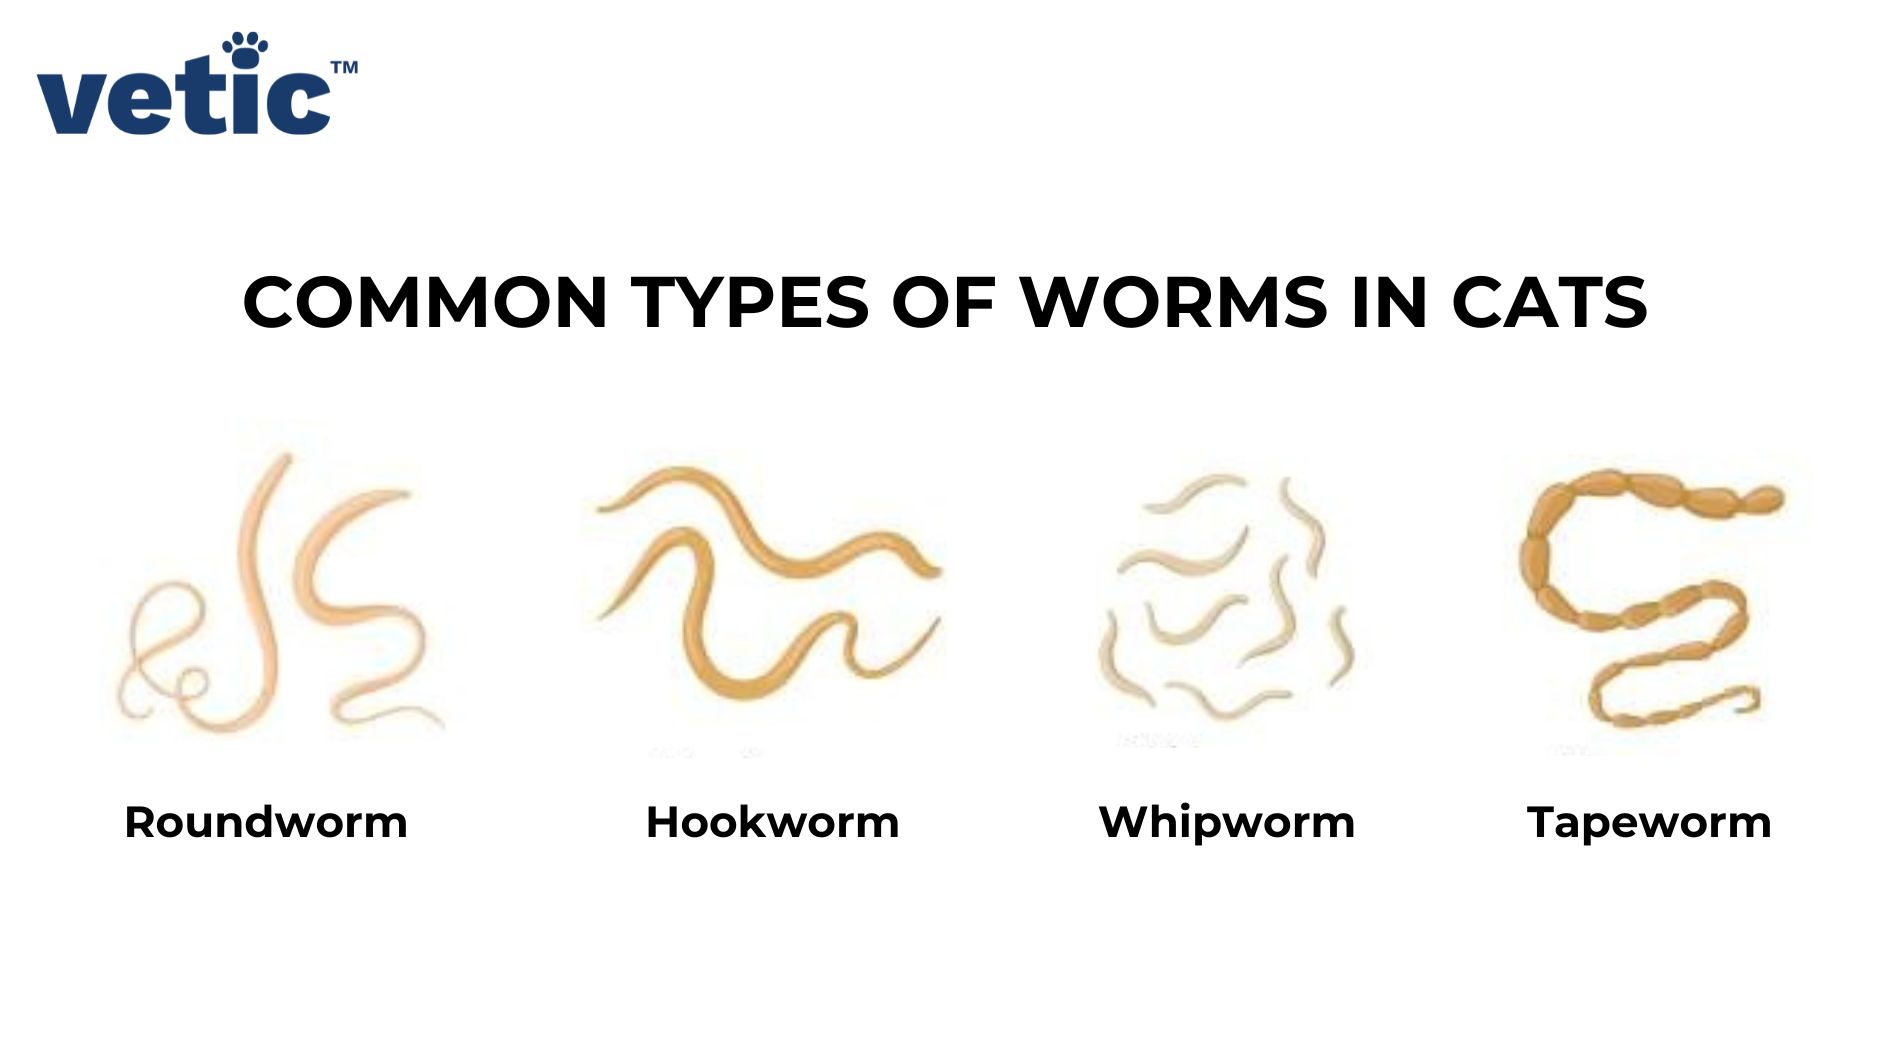 Common types of worms in cats. Illustrations of Roundworm, Hookworm, Whipworm and Tapeworm. Regularly deworming your cats can help you eliminate all 4 types.